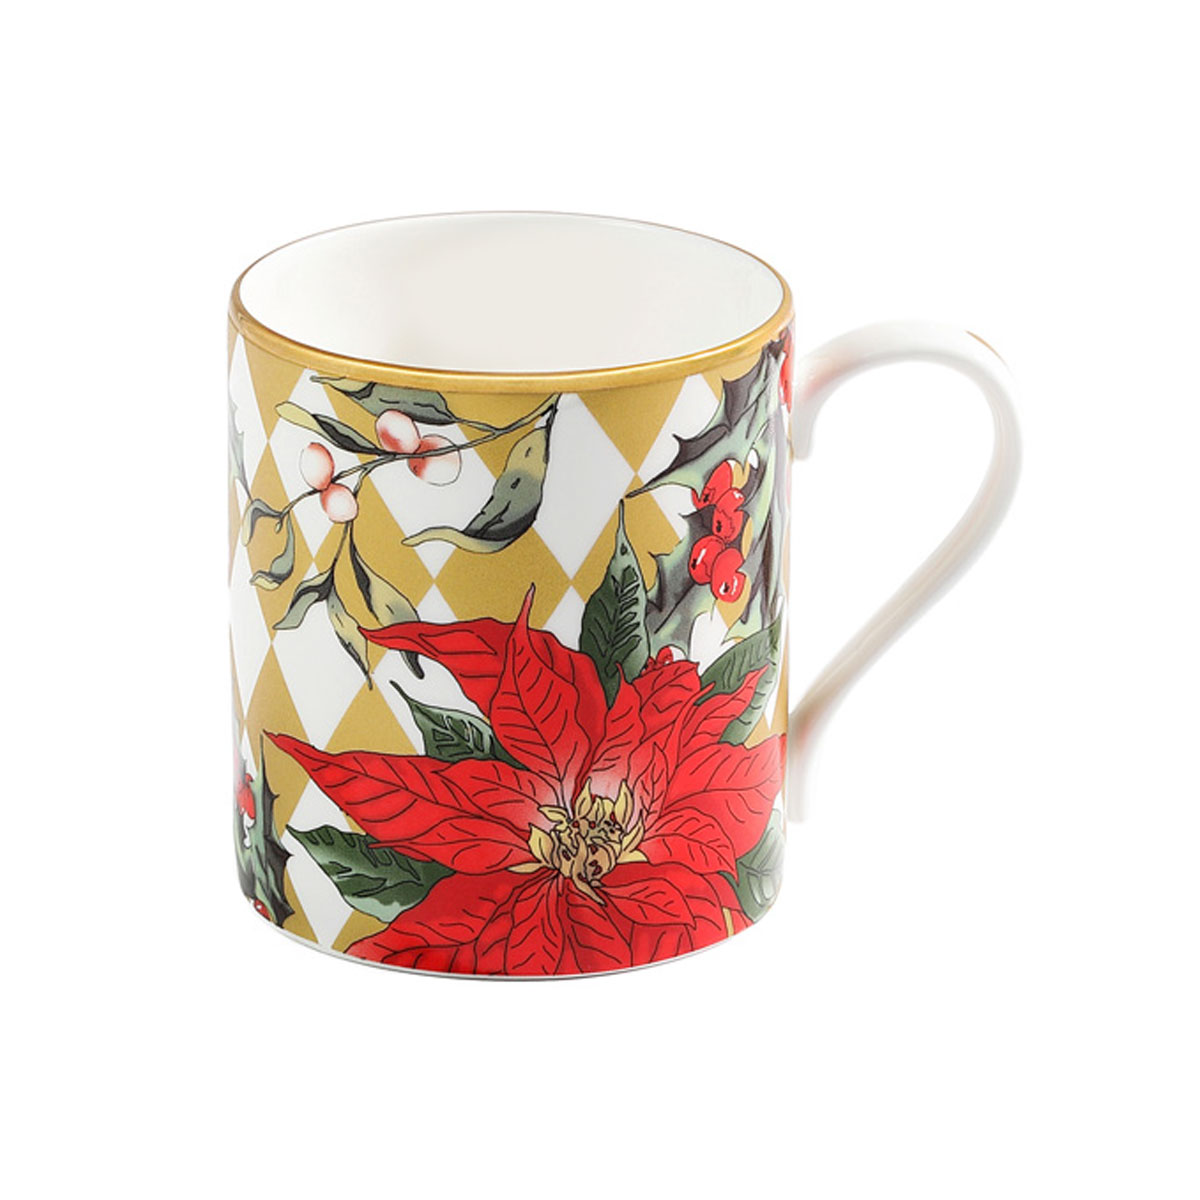 Halcyon Days Parterre Gold with Poinsettia Mug